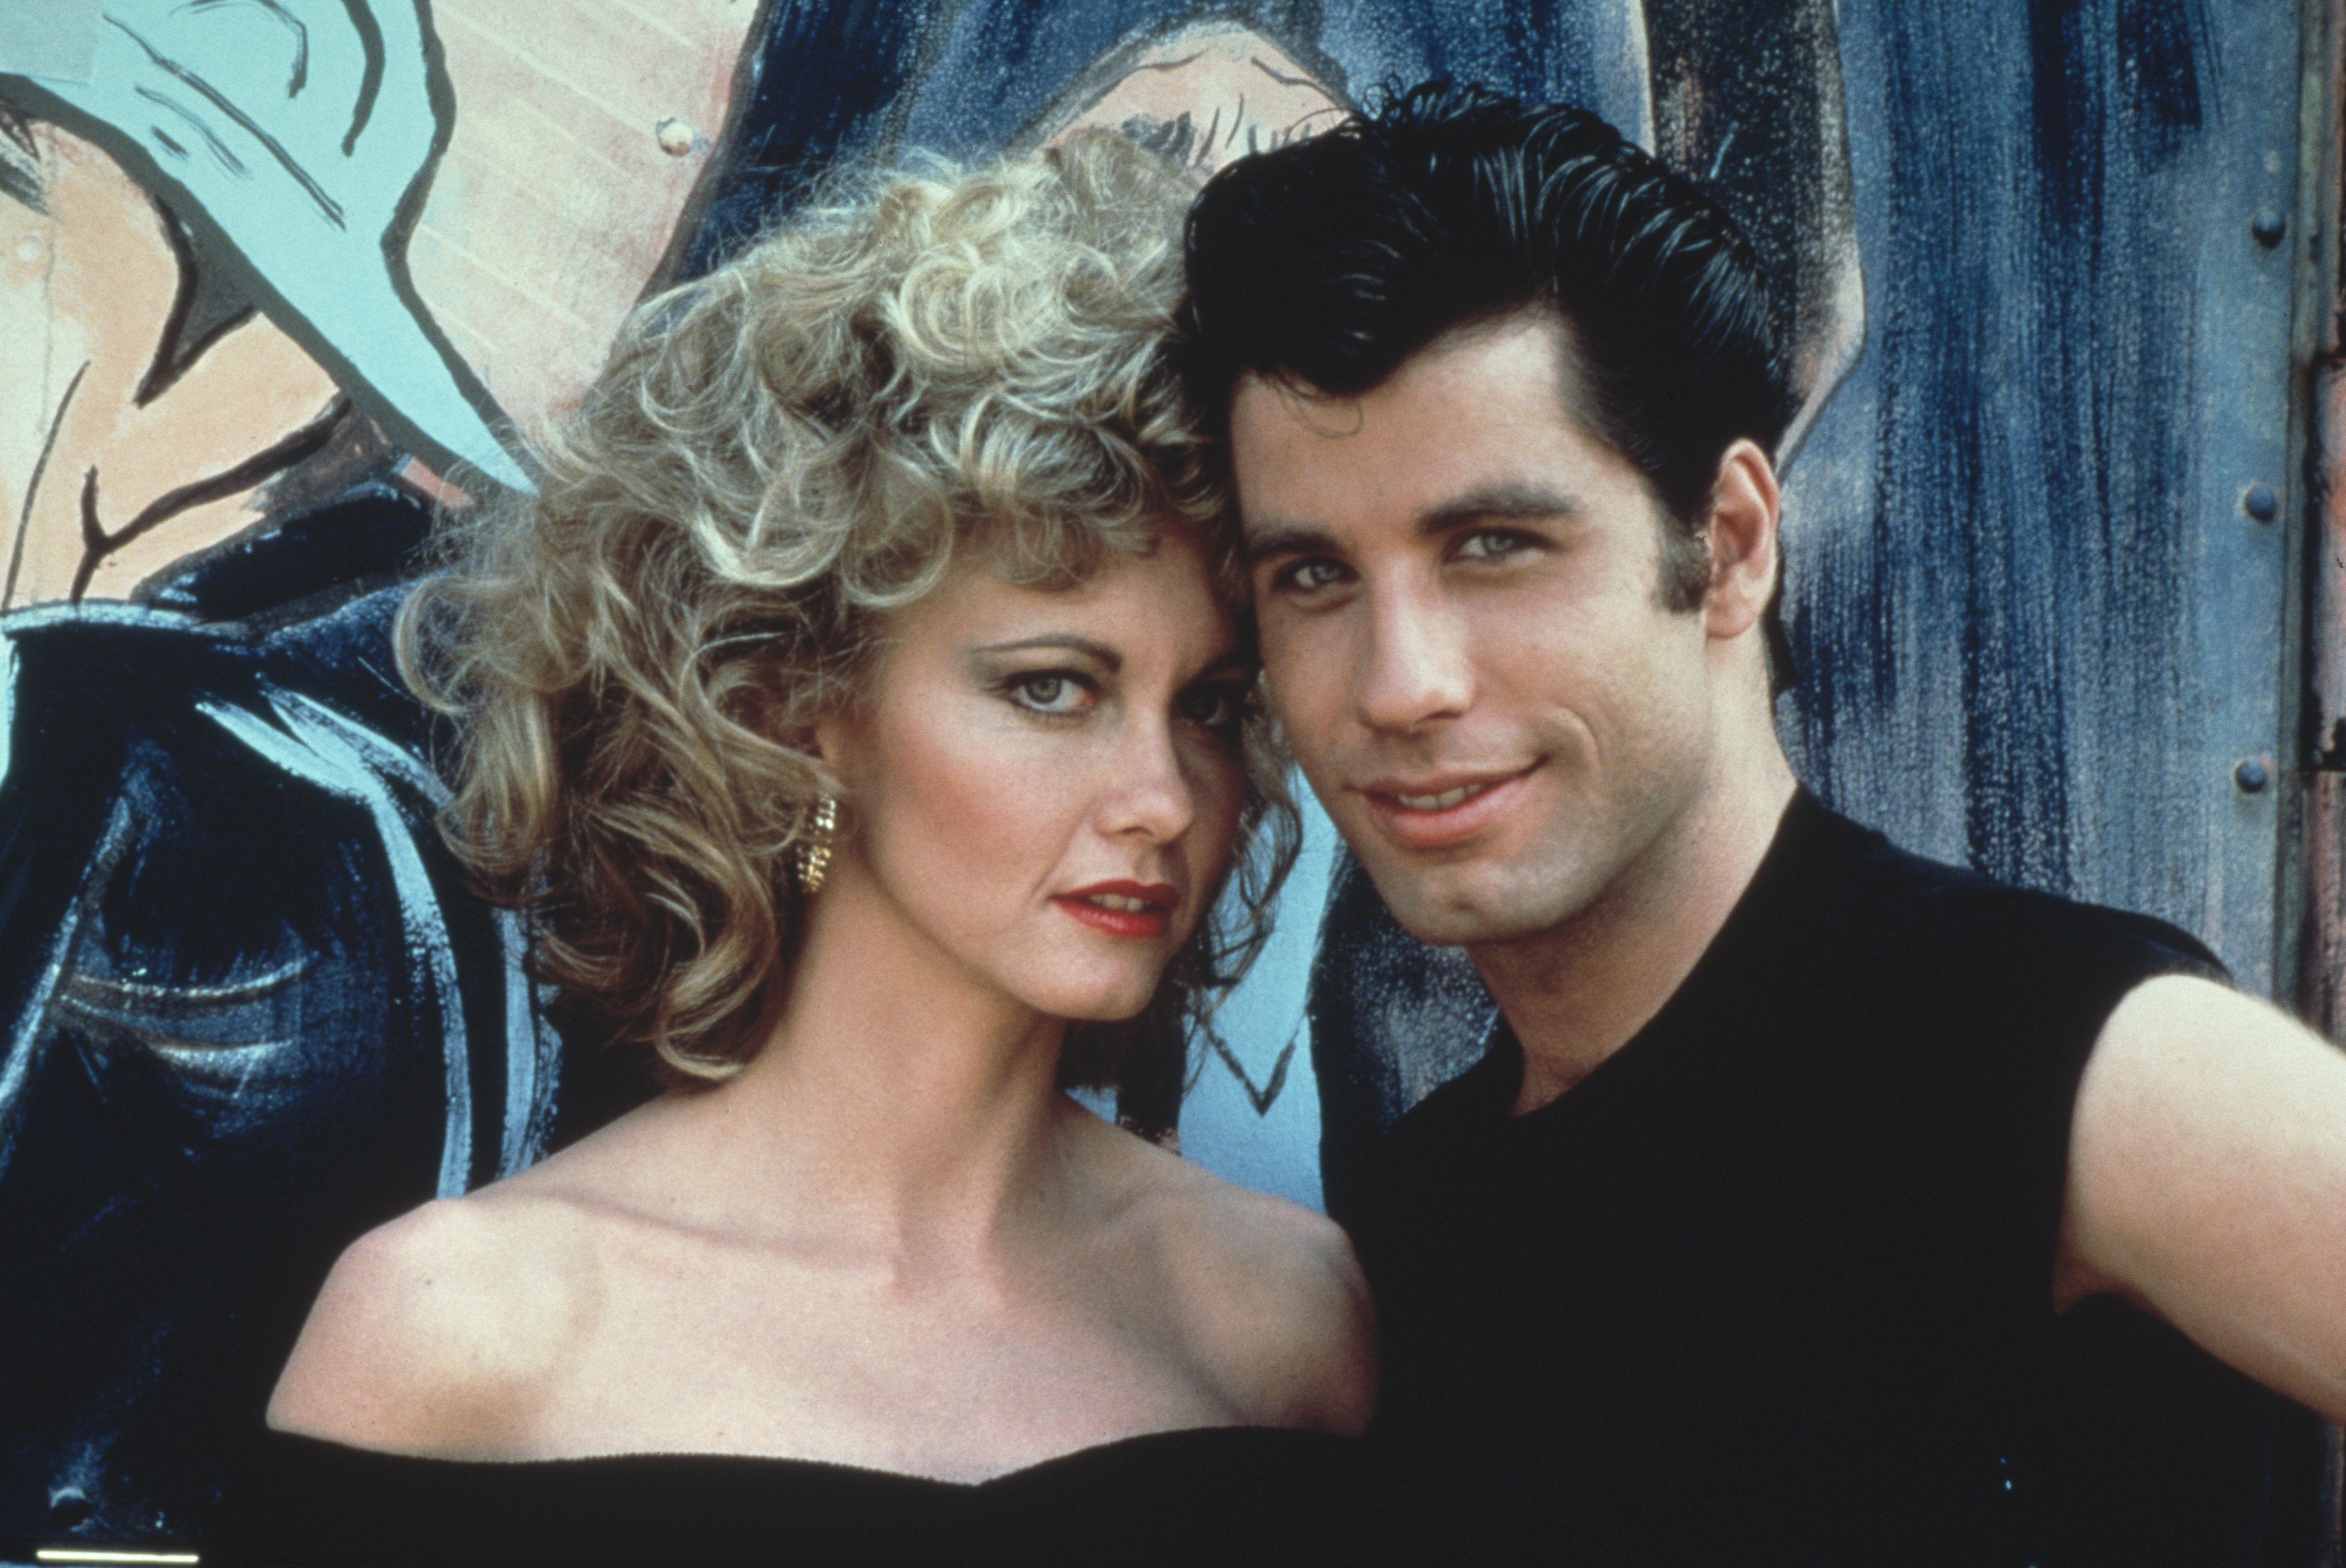 Olivia Newton-John and American actor John Travolta as they appear in the Paramount film 'Grease', 1978. | Source: Getty Images